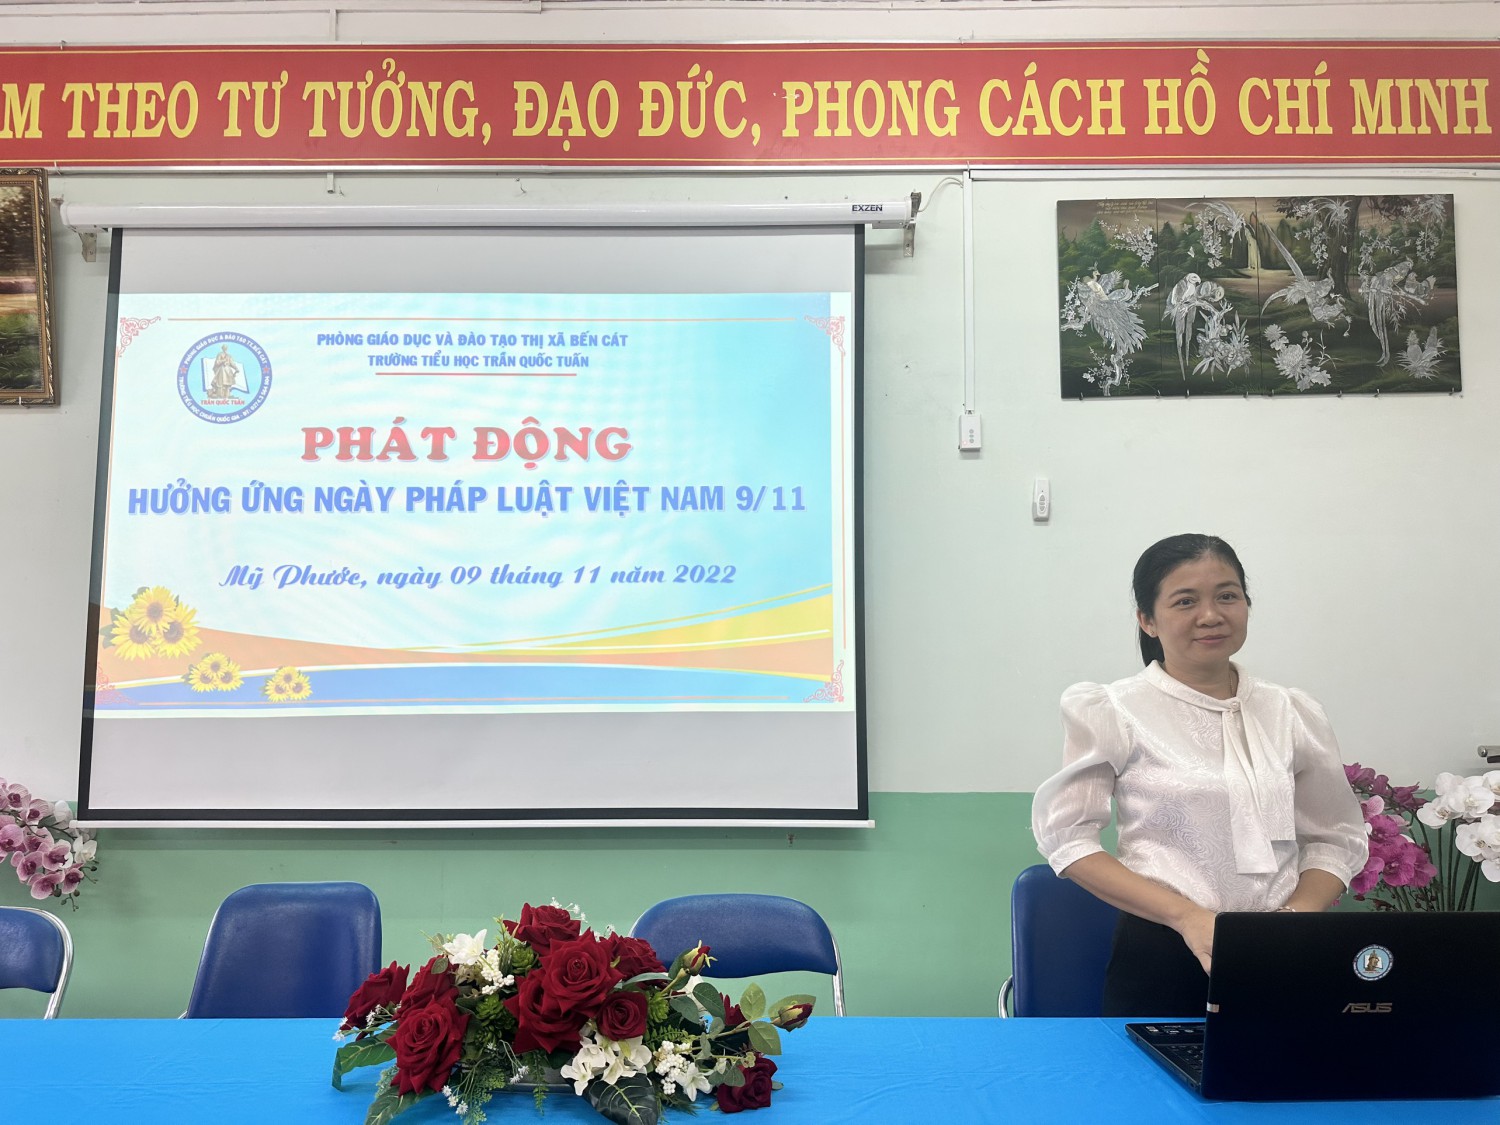 Truong phat dong 9 11 3